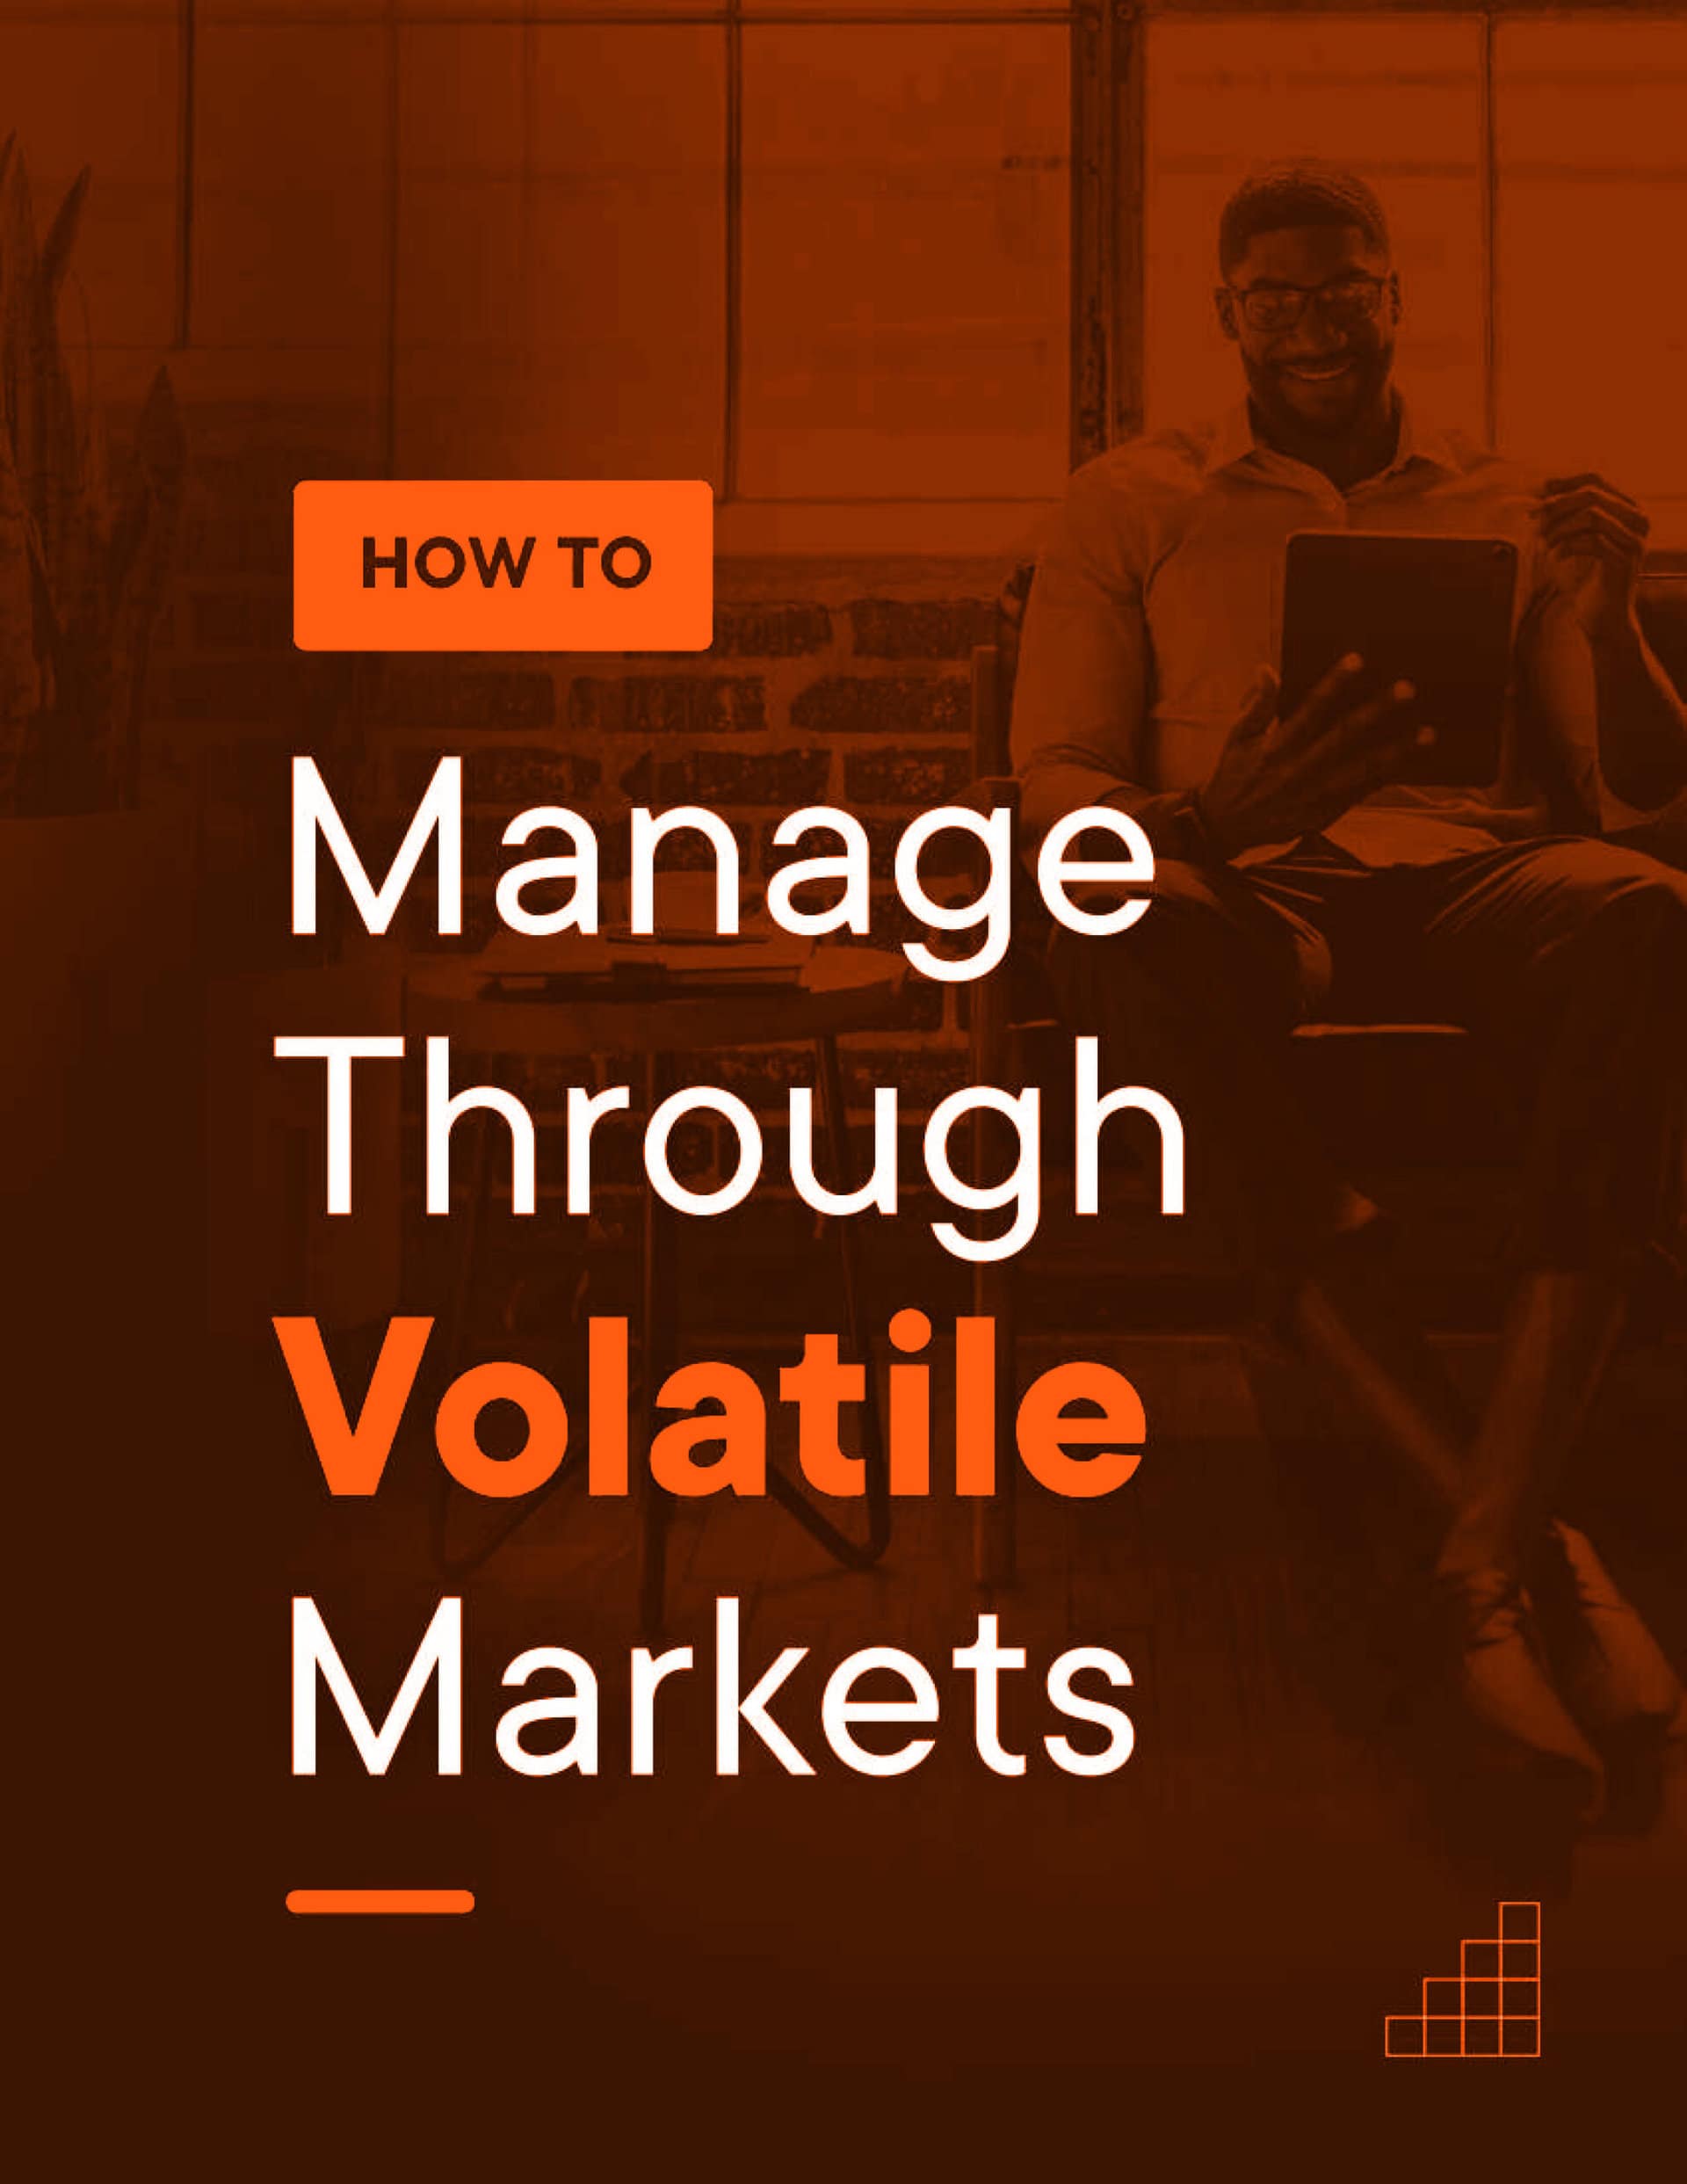 How-to-Manage-Through-Volaiutle-Markets-page-1final